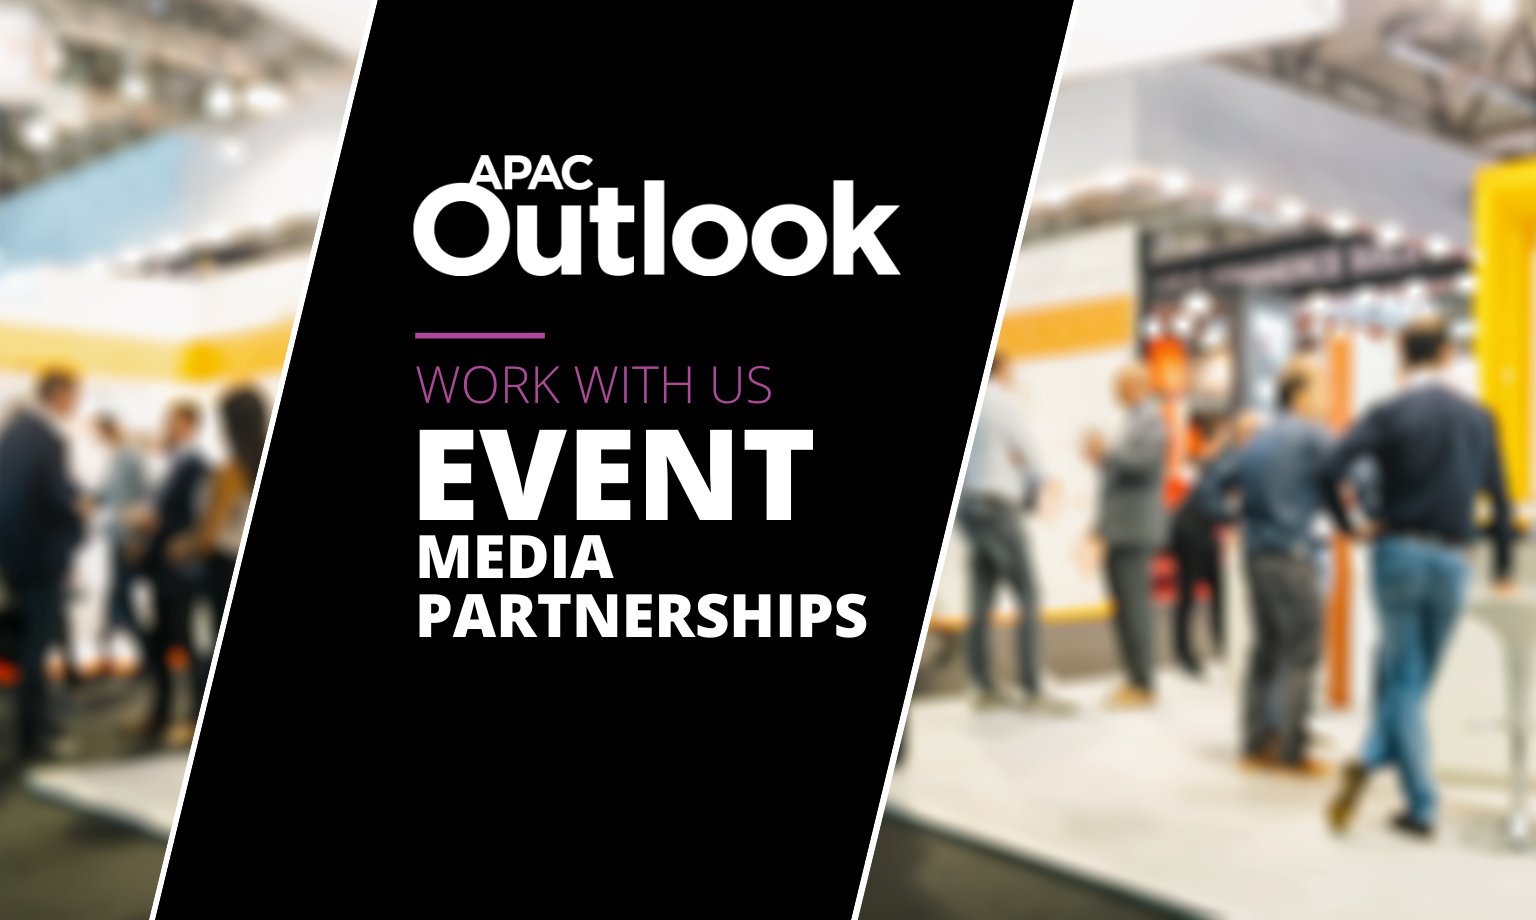 Featured Event Partnerships APAC Outlook